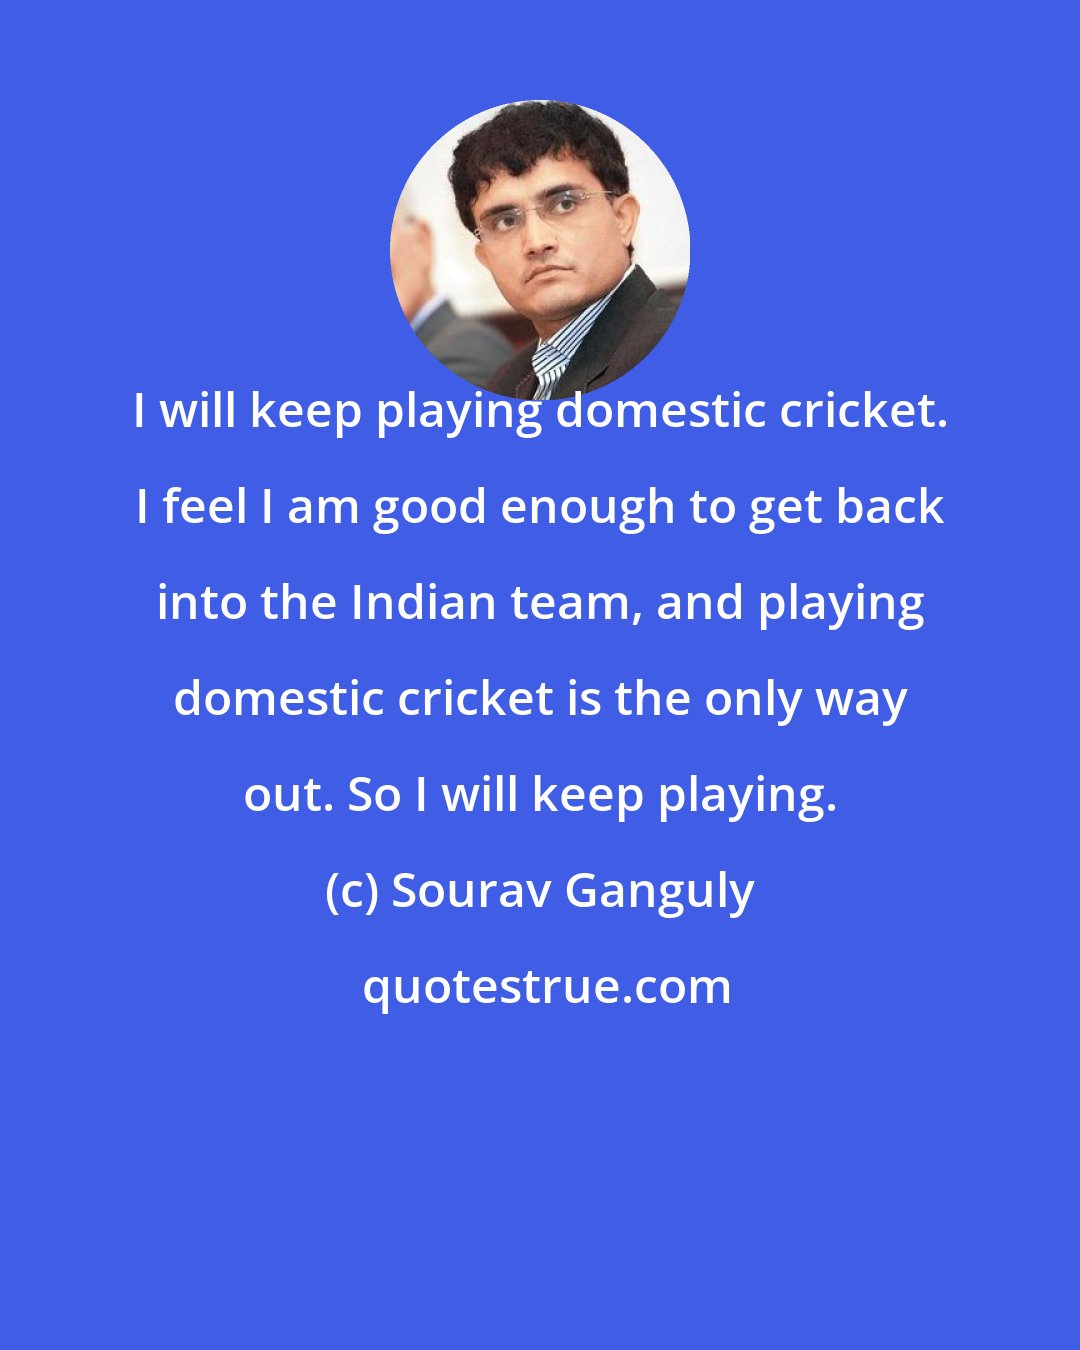 Sourav Ganguly: I will keep playing domestic cricket. I feel I am good enough to get back into the Indian team, and playing domestic cricket is the only way out. So I will keep playing.